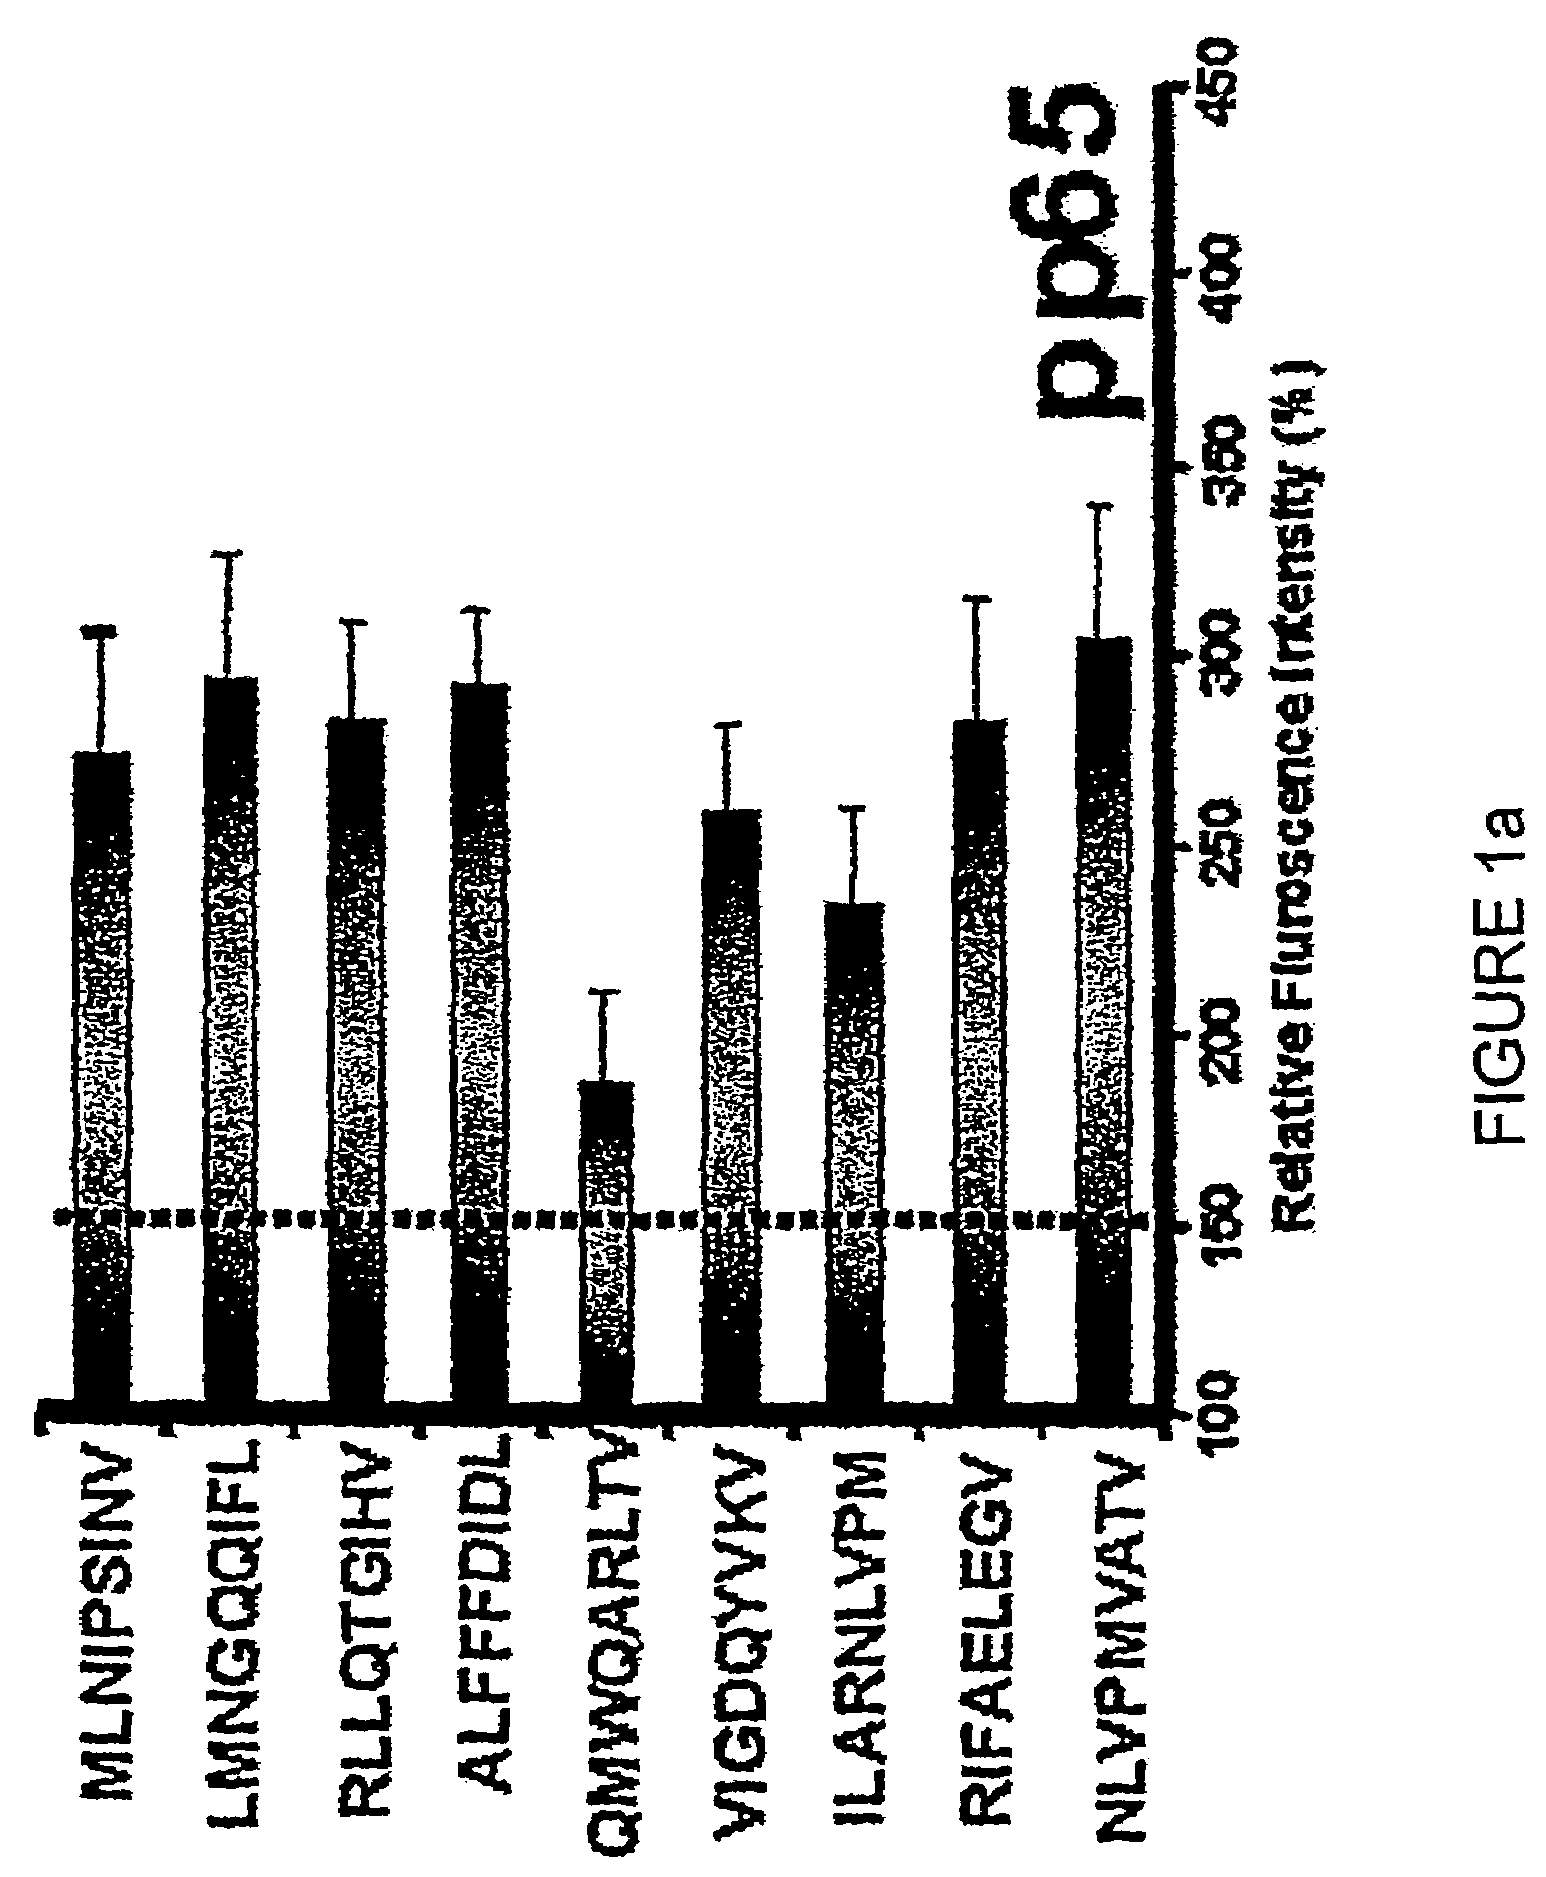 Human cytomegalovirus (HCMV) cytotoxic T cell epitopes, polyepitopes compositions comprising same and diagnostic and prophylactic and therapeutic uses therefor